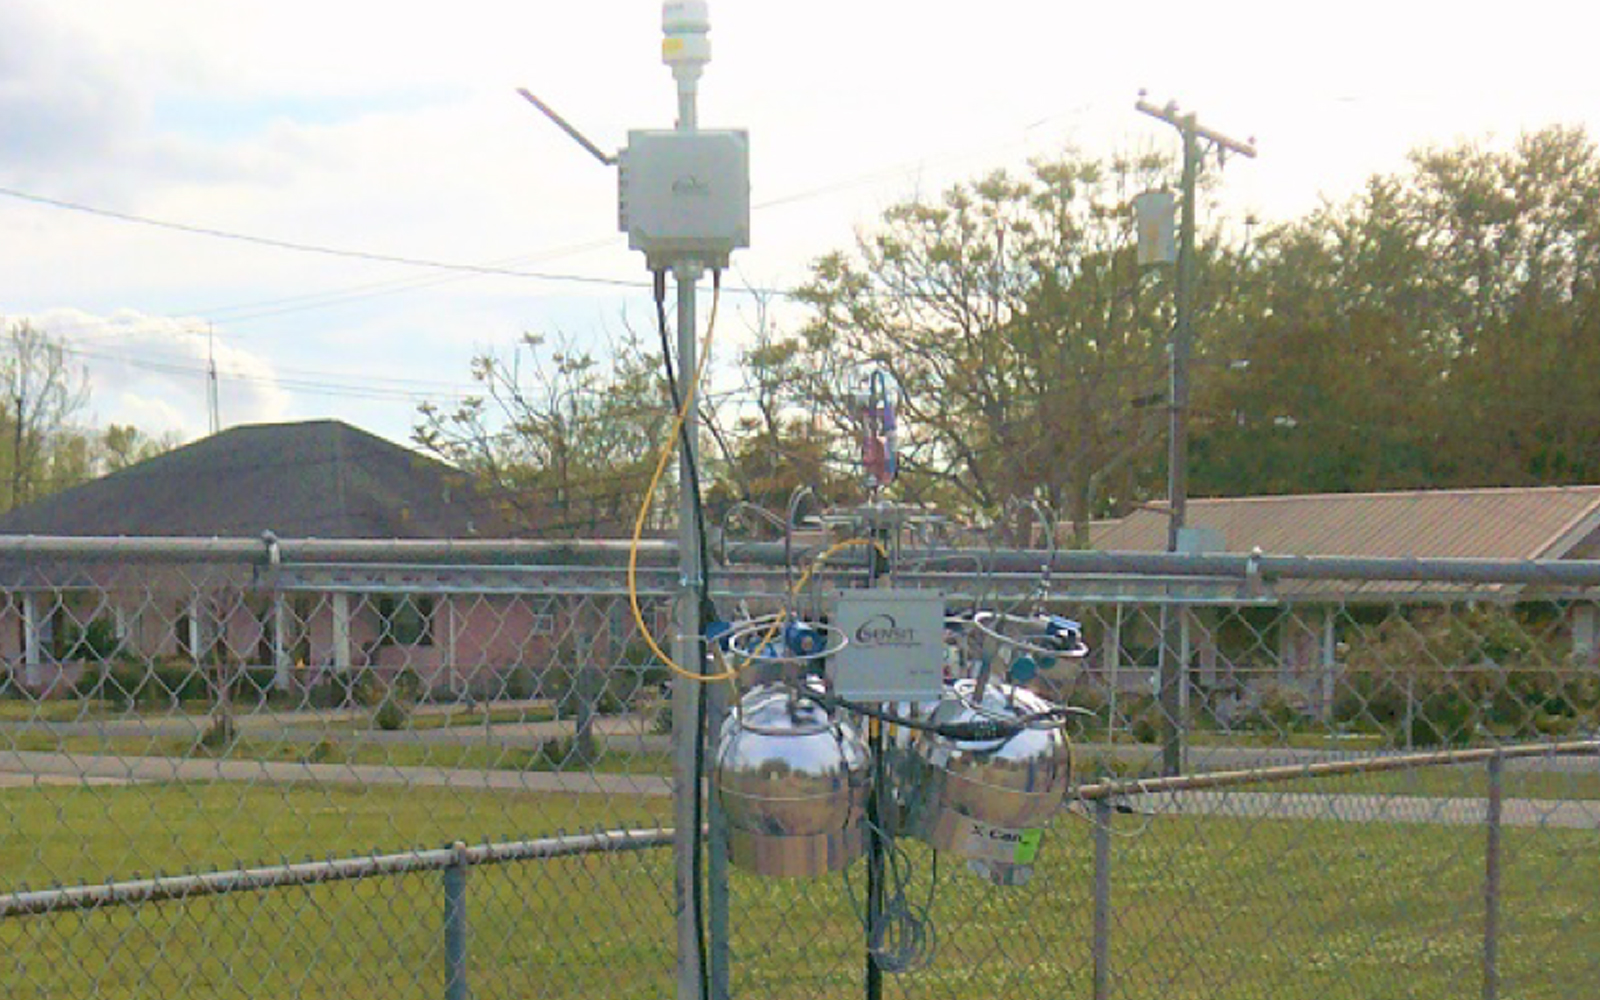 Remote monitoring equipment deployed by ERG near a local elementary school to assess potential exposure